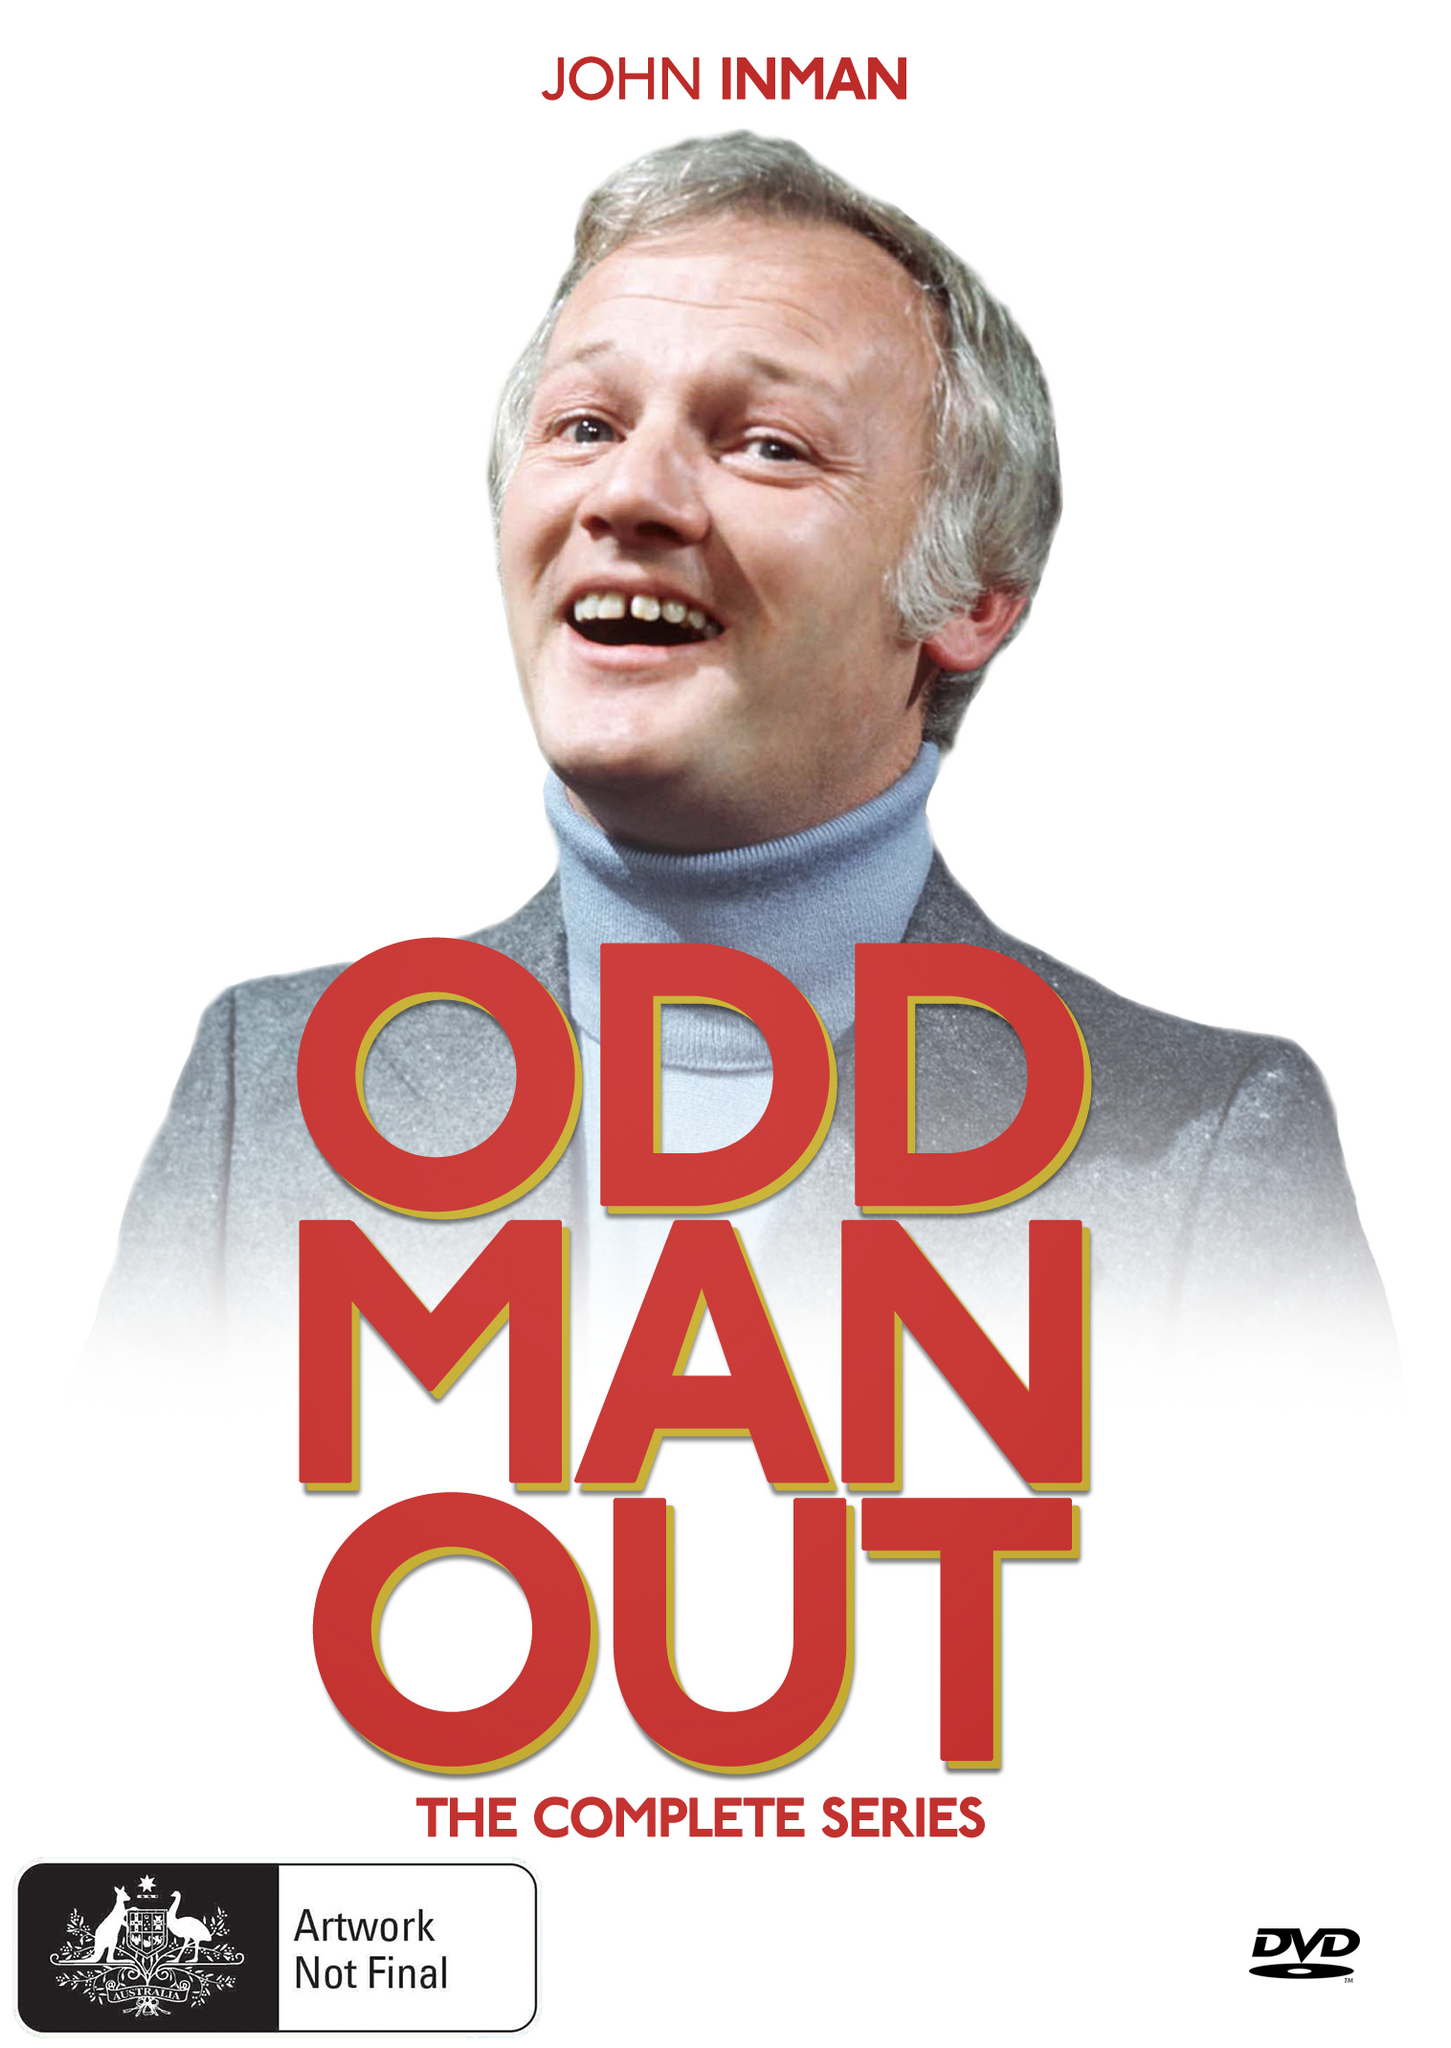 ODD MAN OUT: THE COMPLETE SERIES